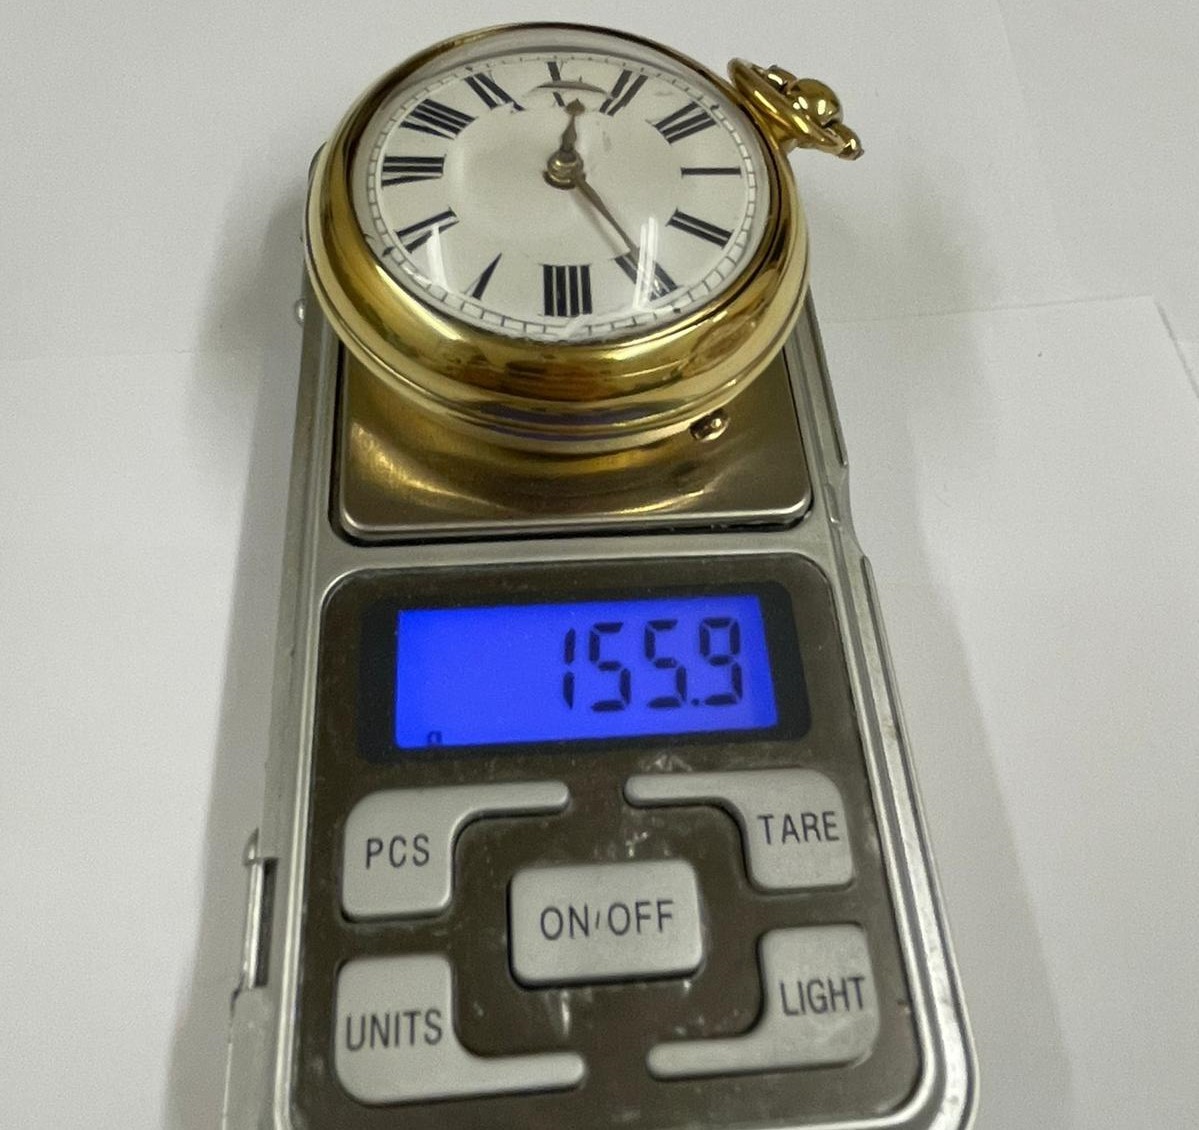 Antique yellow metal verge fusee pocket watch, working, 155.9g but sold with no guarantees - Image 3 of 9